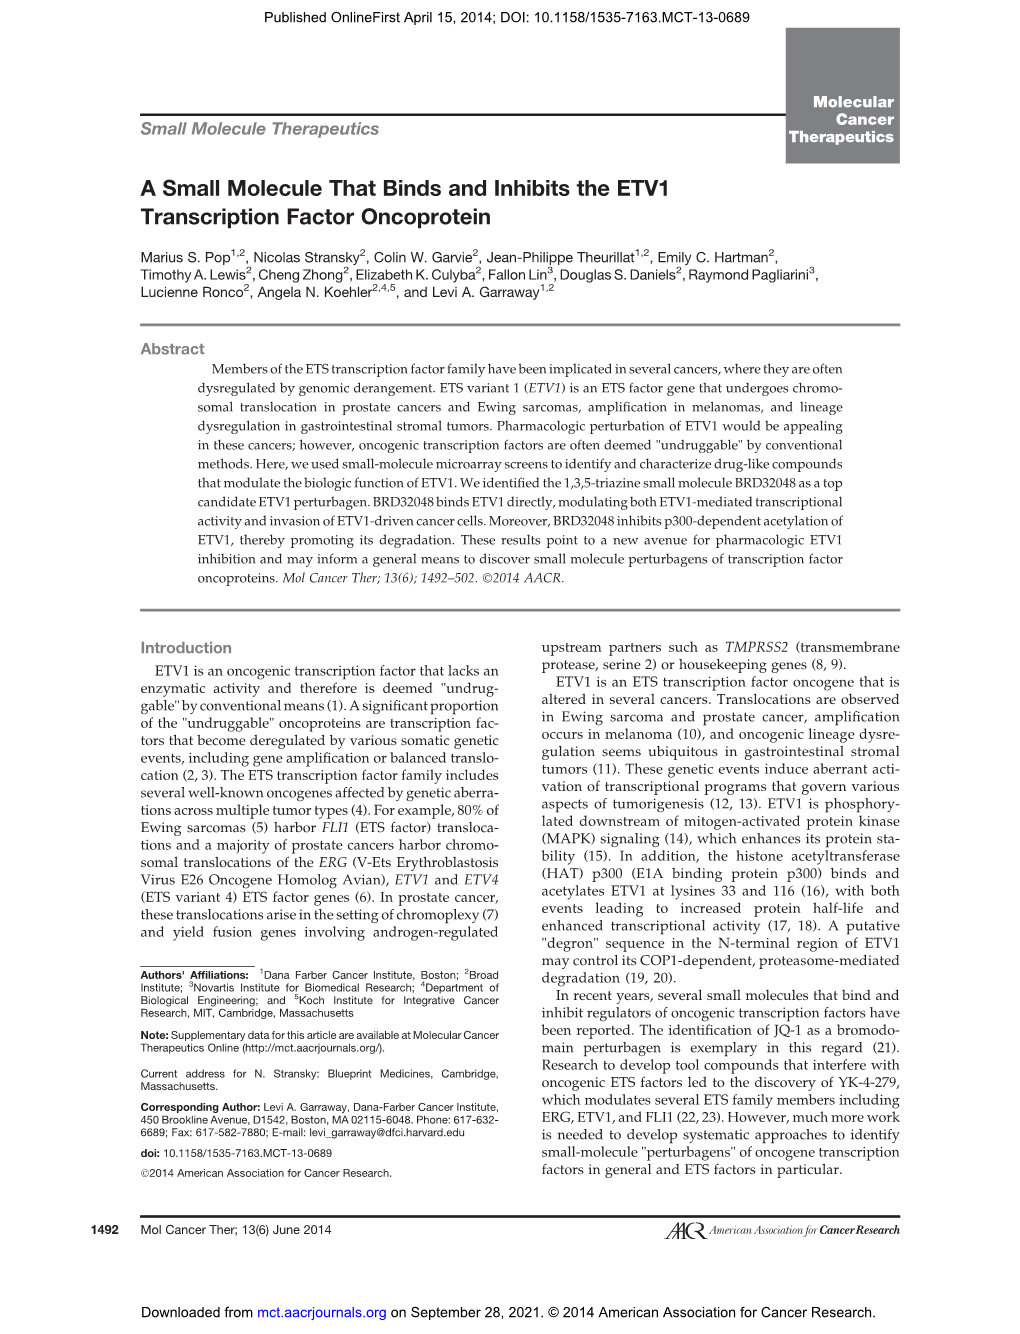 A Small Molecule That Binds and Inhibits the ETV1 Transcription Factor Oncoprotein